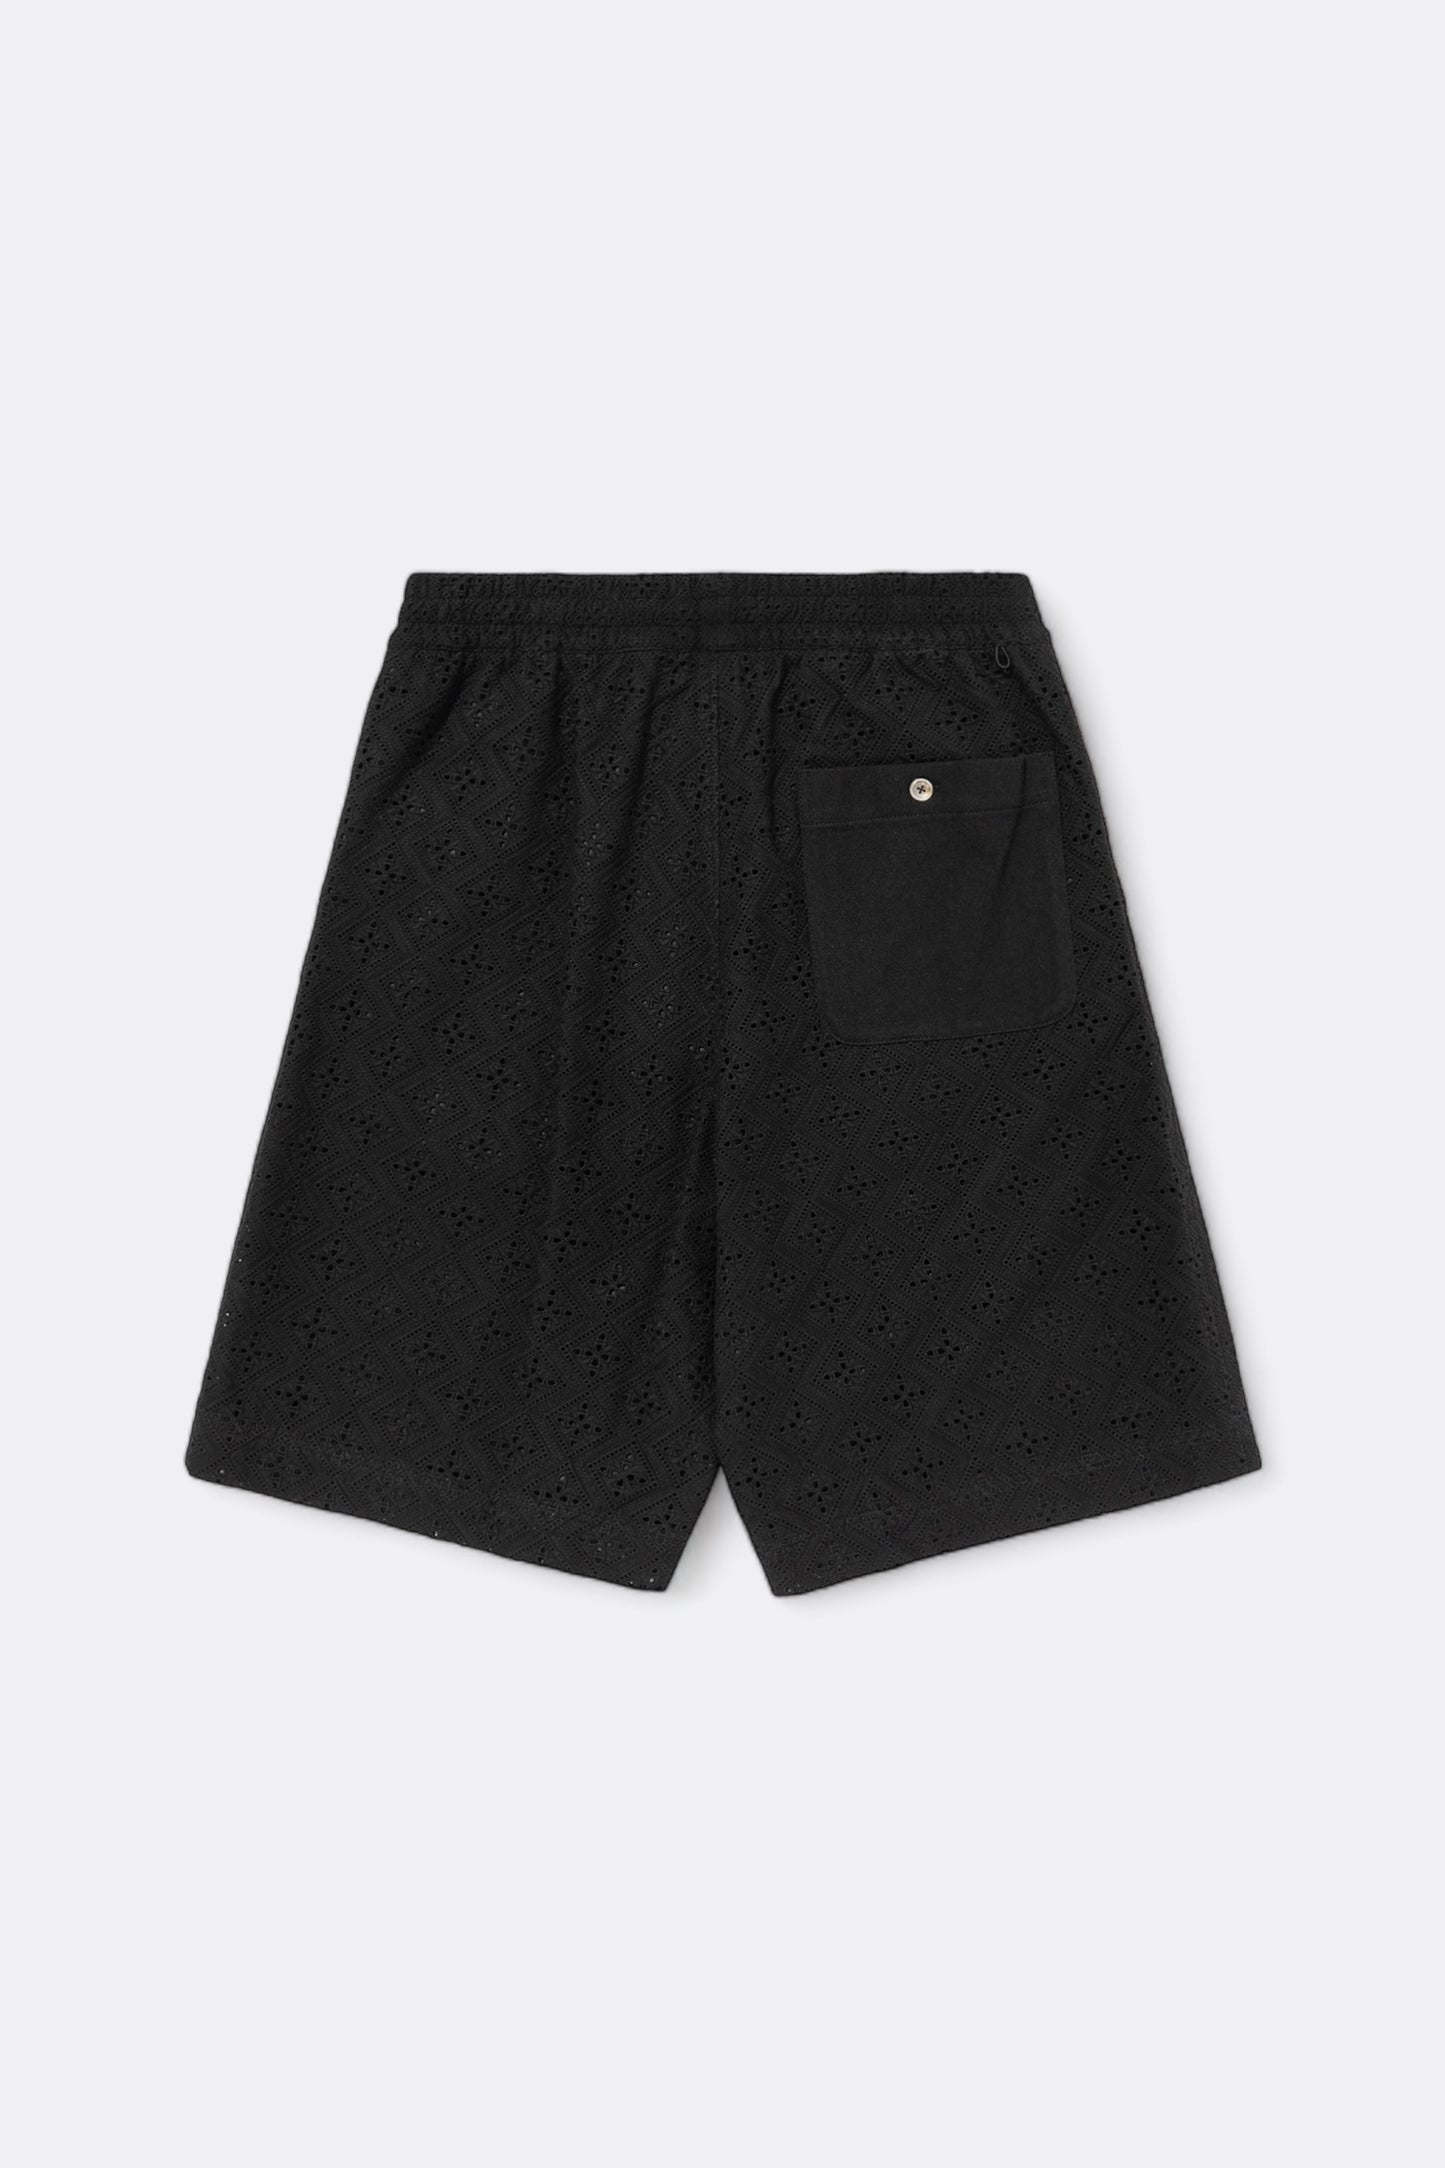 Merely Made - Merely Premium Flower Lace Wide Short (Black)